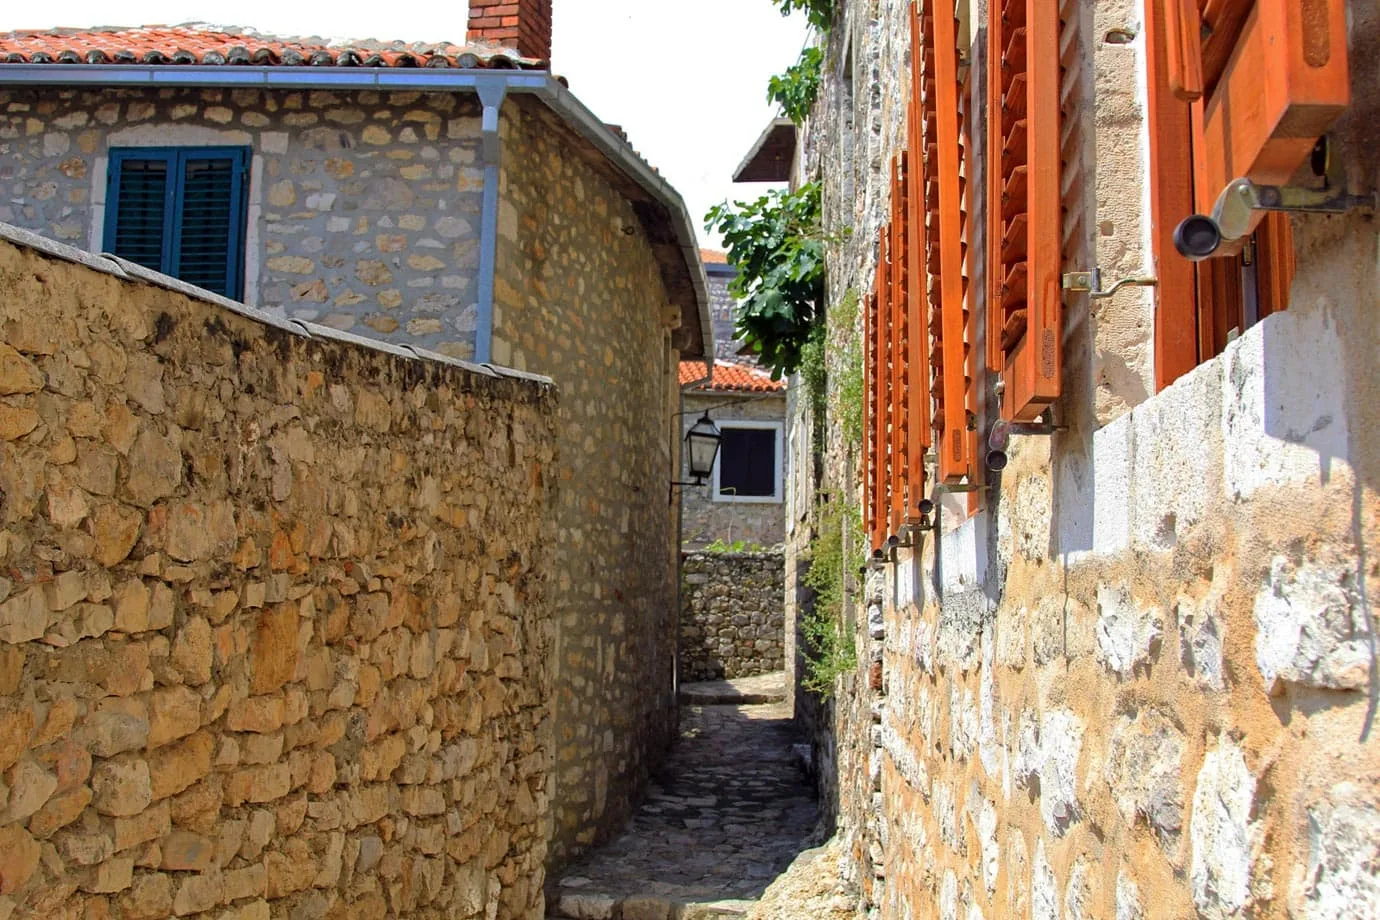 Like most towns along the coast of Montenegro, there is an Old Town with cobbled stones and small side streets